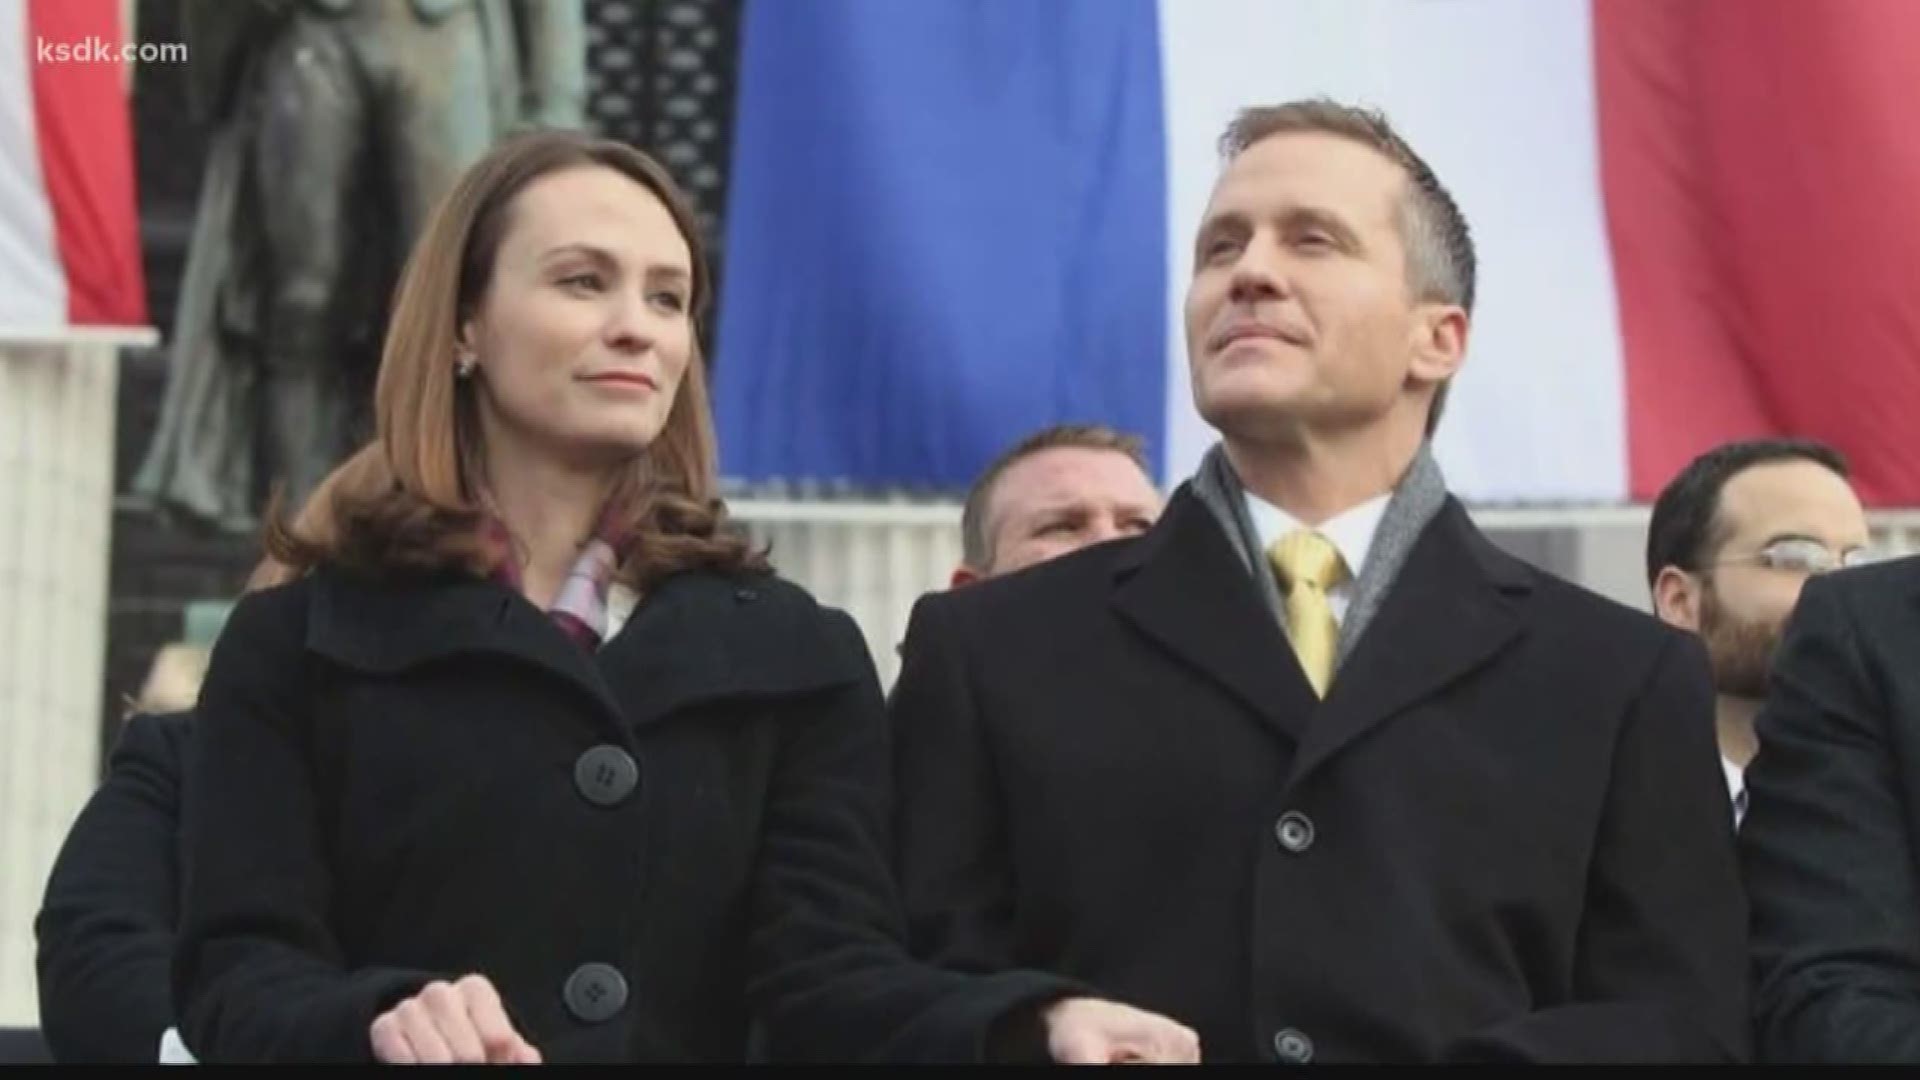 The Missouri Ethics Commission released an 18-page report on campaign wrongdoing, which cleared Eric Greitens individually.